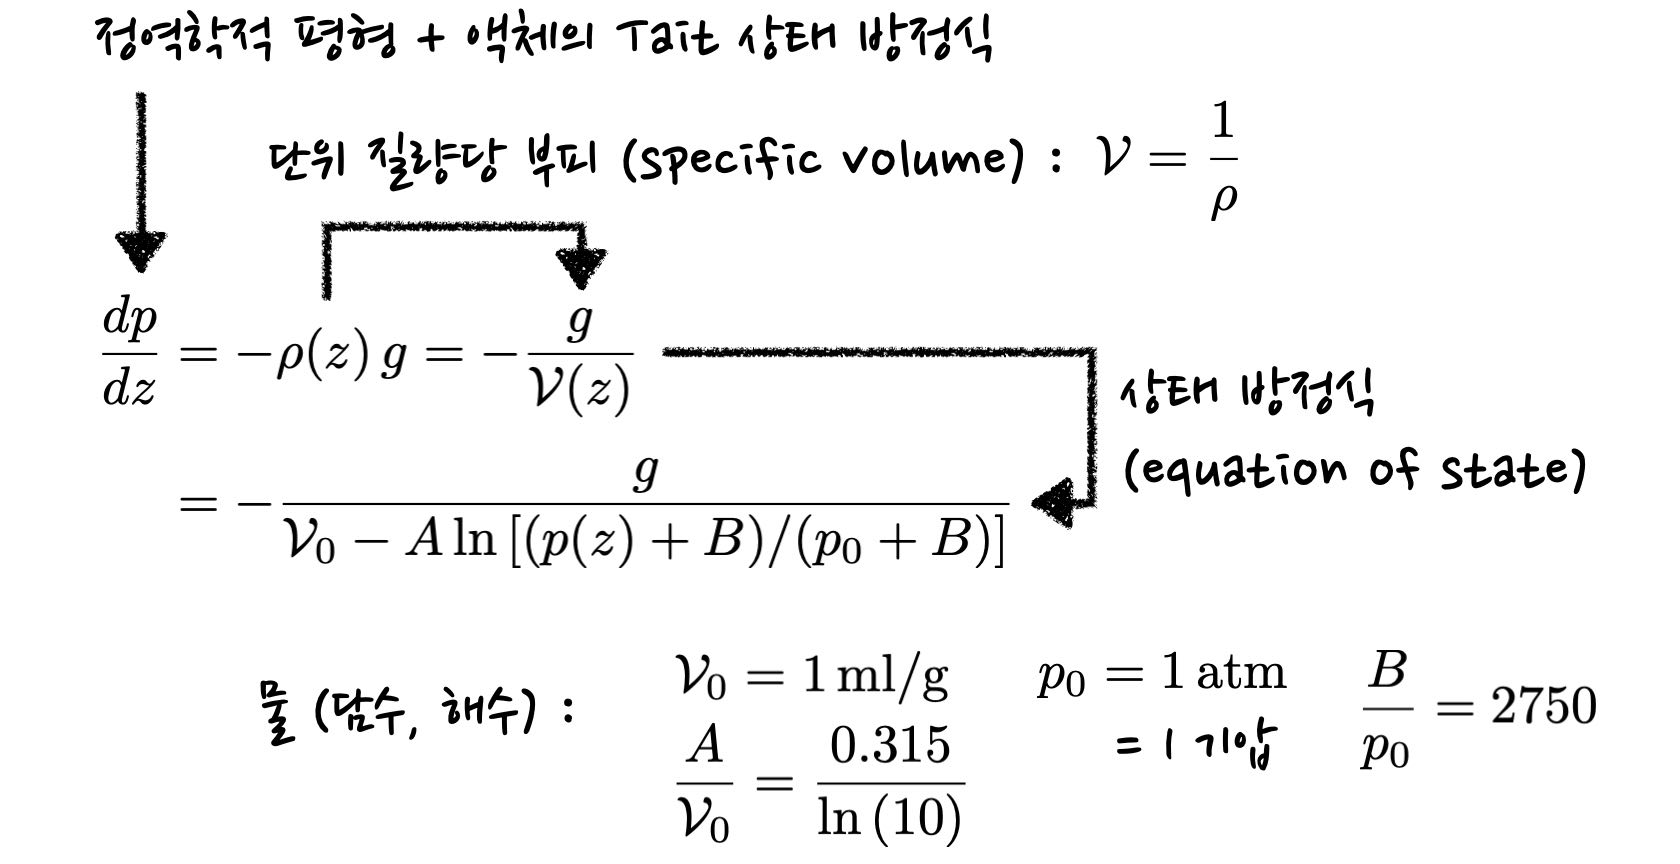 schematics of hydrostatic equilibrium of water, in conjunction with Tait equation of state for liquid